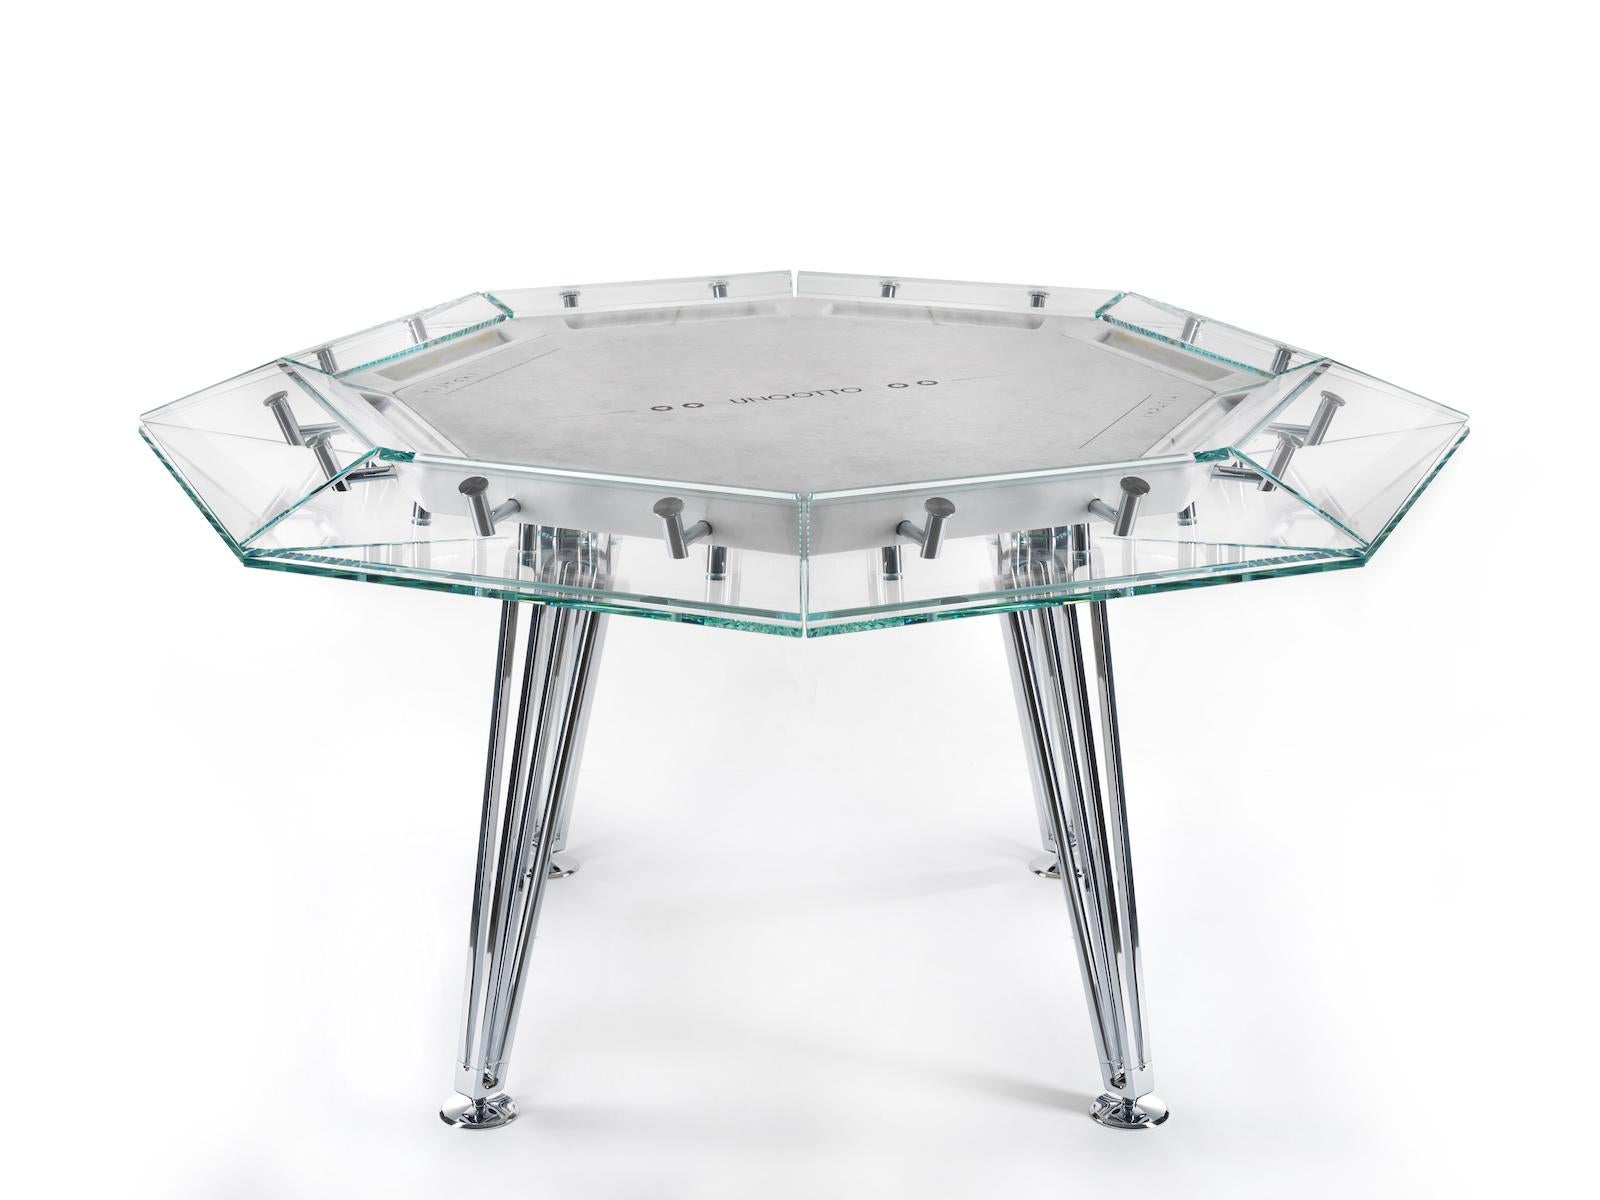 Unootto Marble, 8 Players, Contemporary Design Poker Table by Impatia For Sale 9